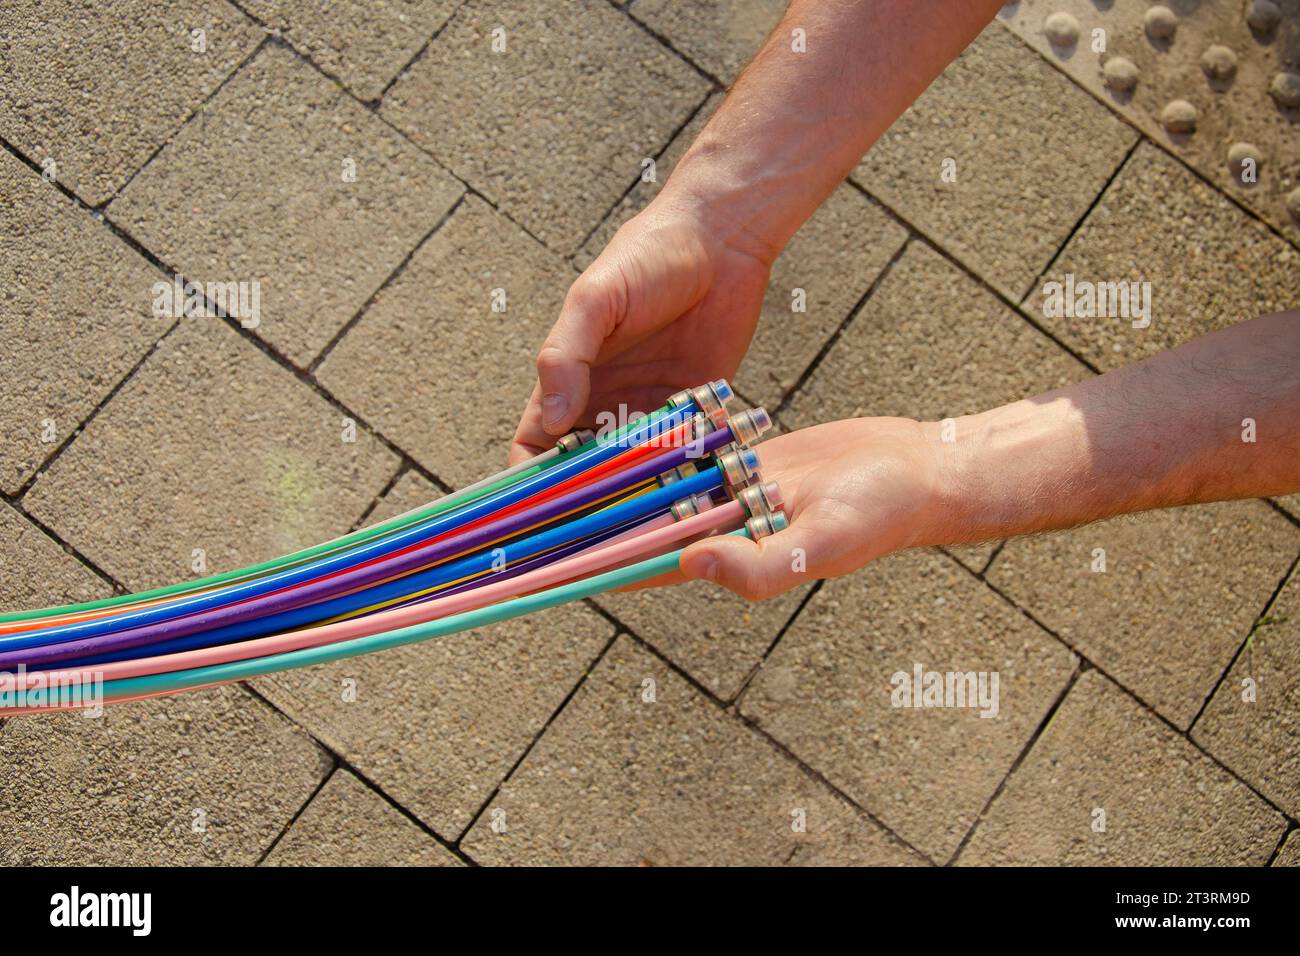 Fibre optic cable in the hands of a man against the background of paving slabs. Stock Photo